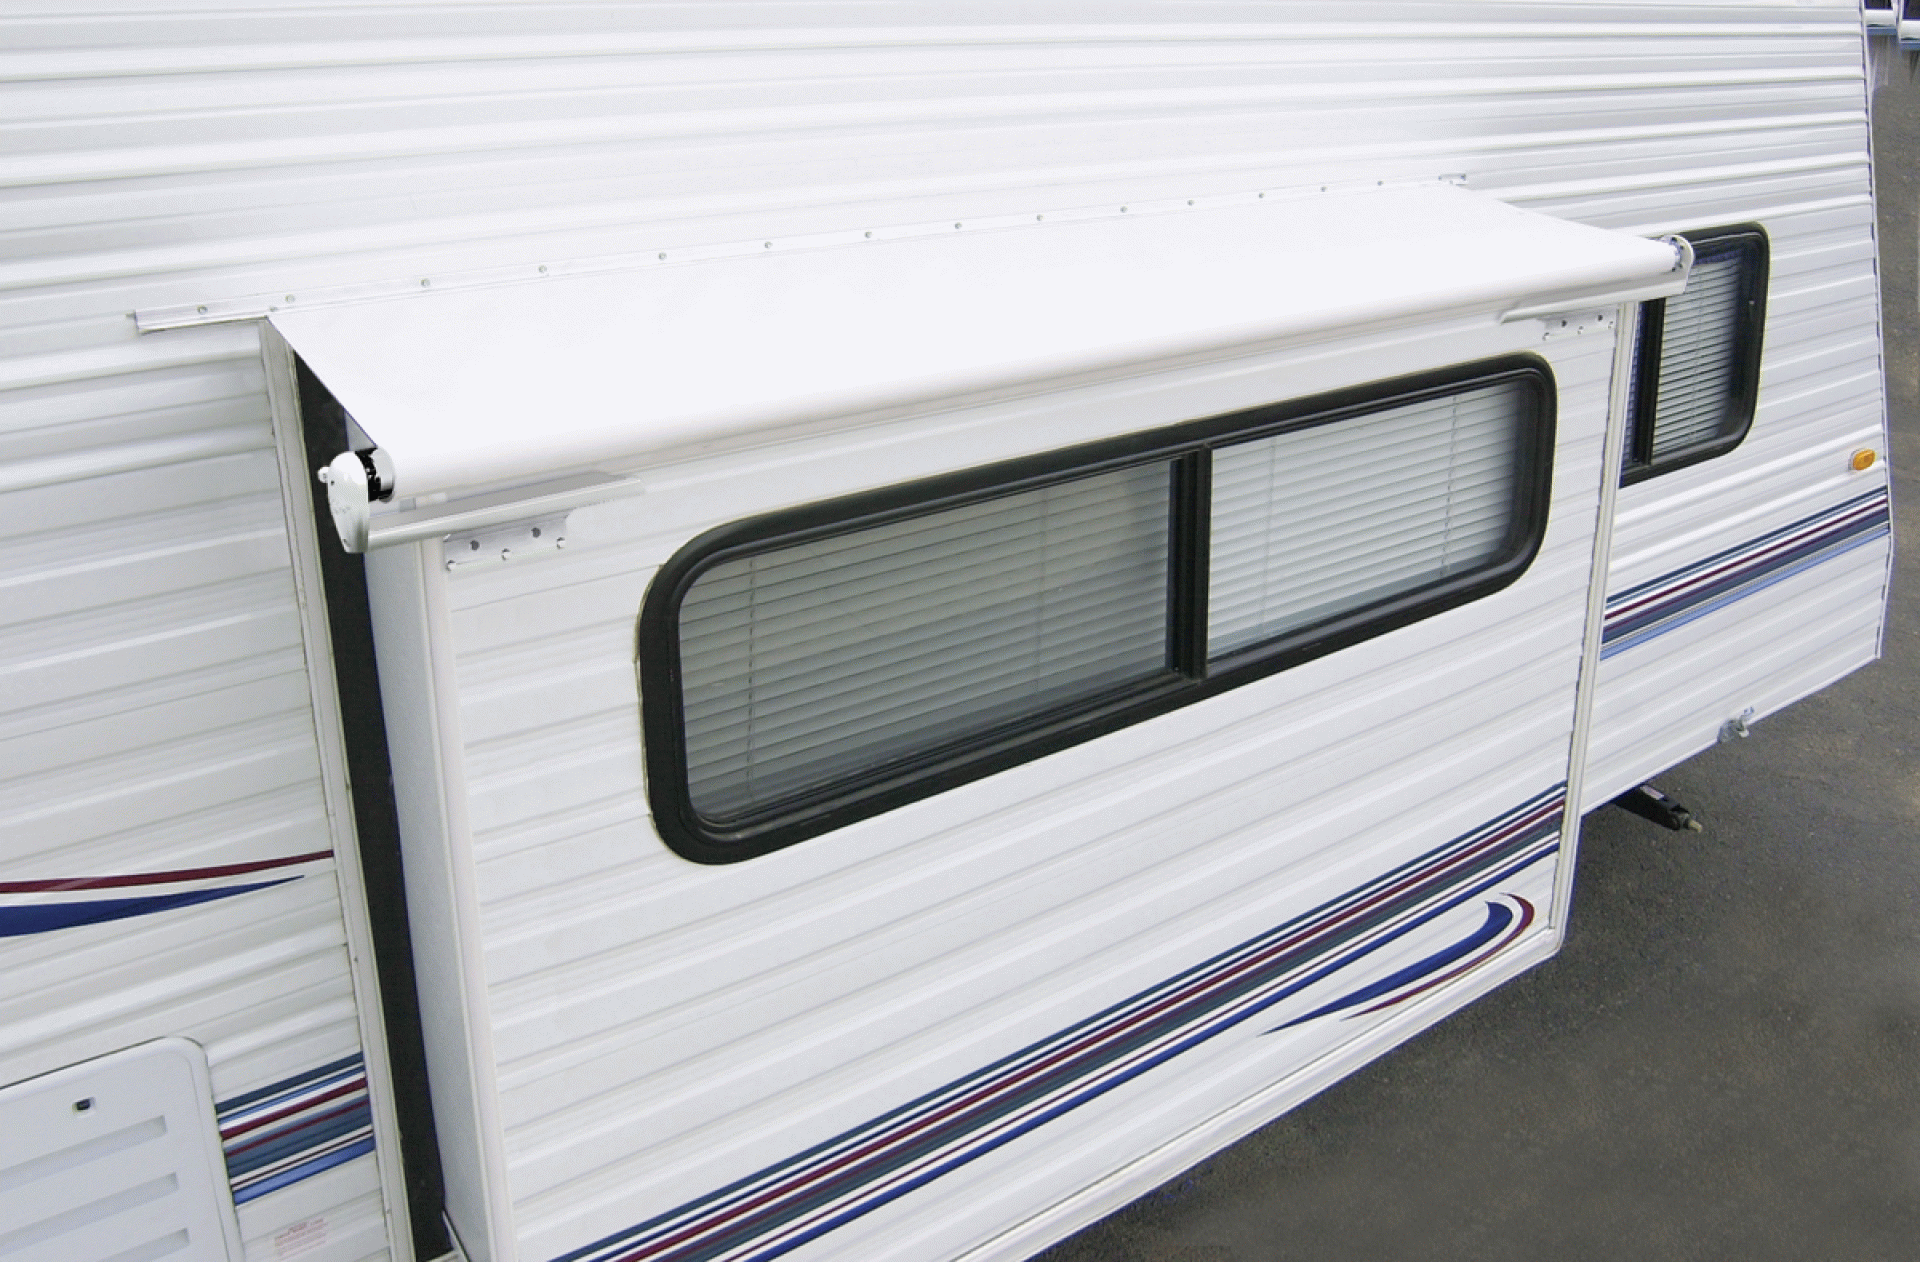 CAREFREE OF COLORADO | LH0490042 | SLIDEOUT COVER AWNING 42" - 49.9" ROOF RANGE WHITE VINYL